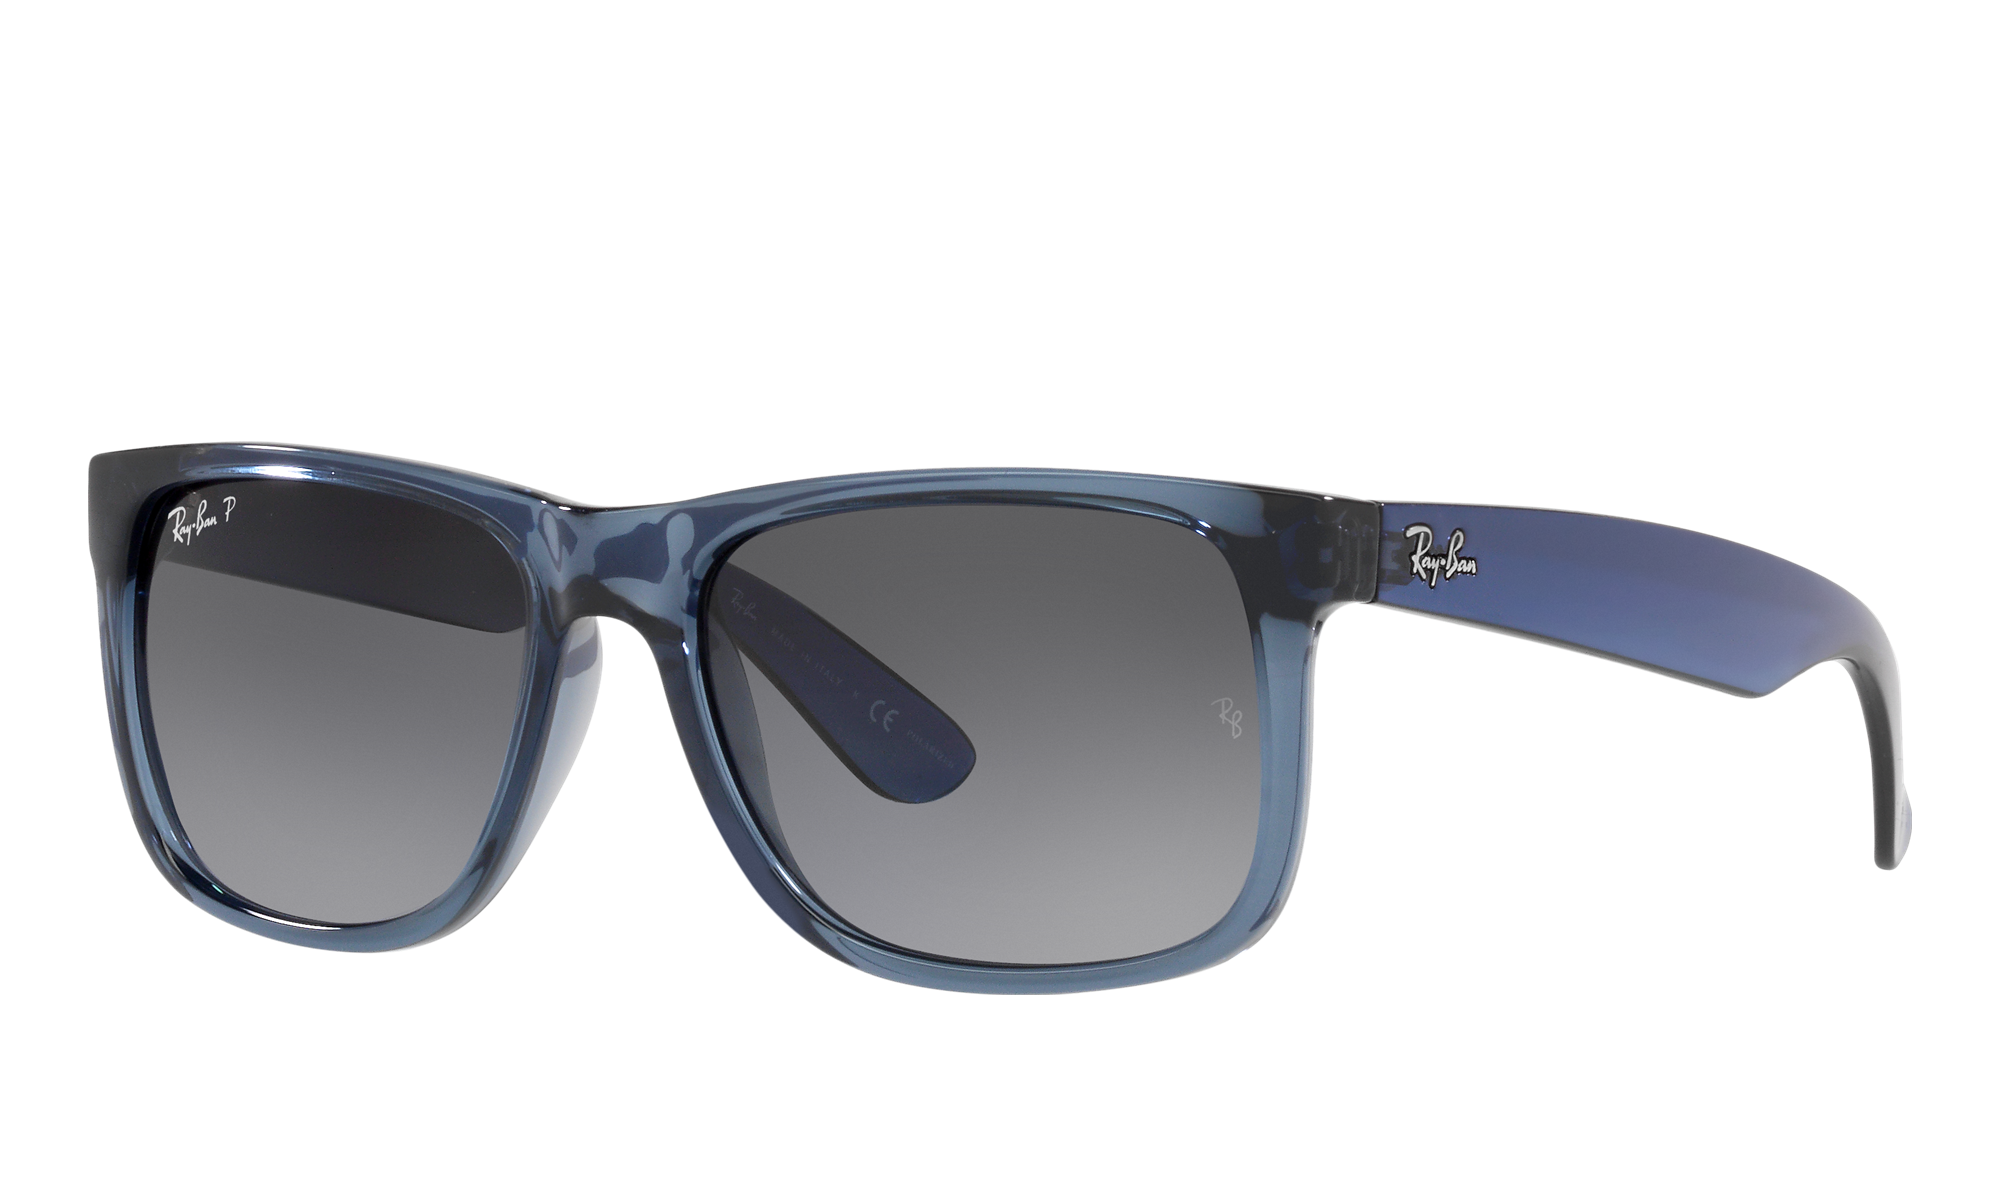 Ray-Ban Unisex Rb4165 Transparent Blue Size: Small